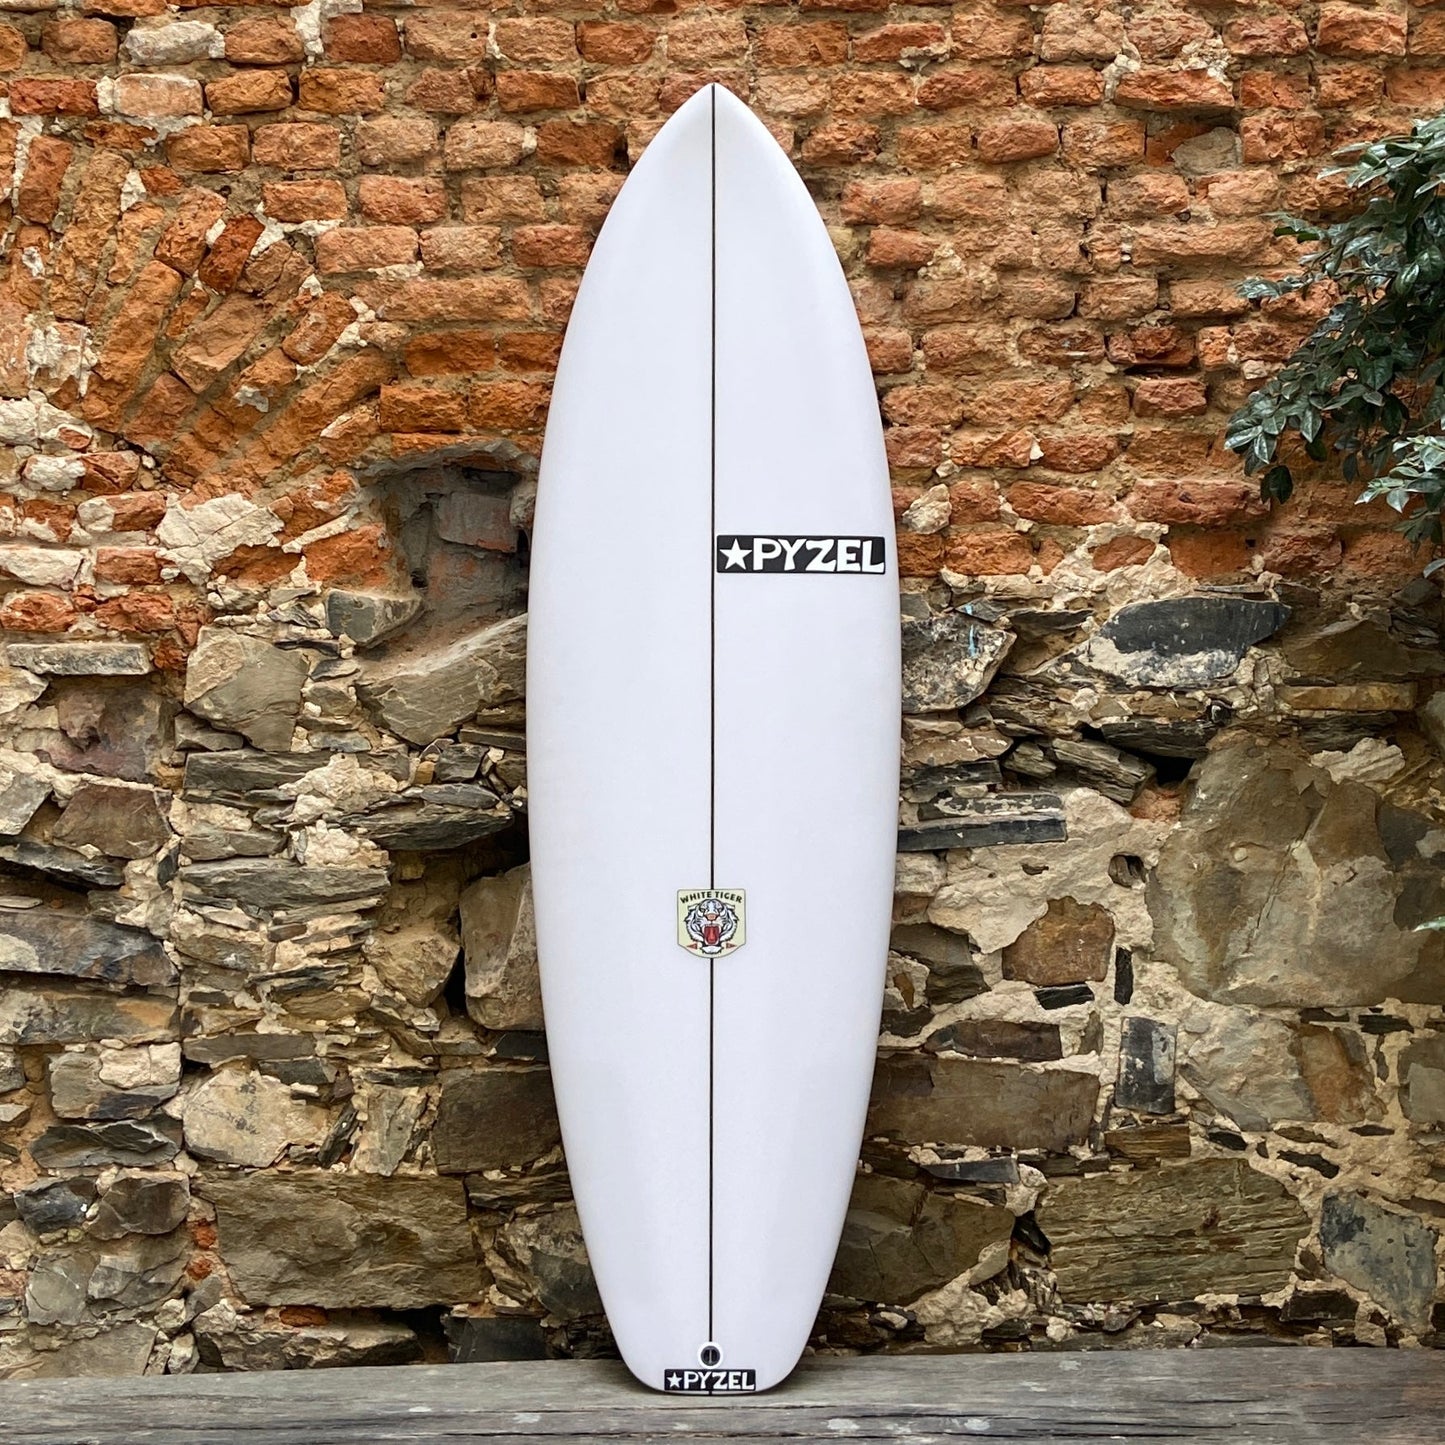 PYZEL SURFBOARDS WHITE TIGER 5'7" 